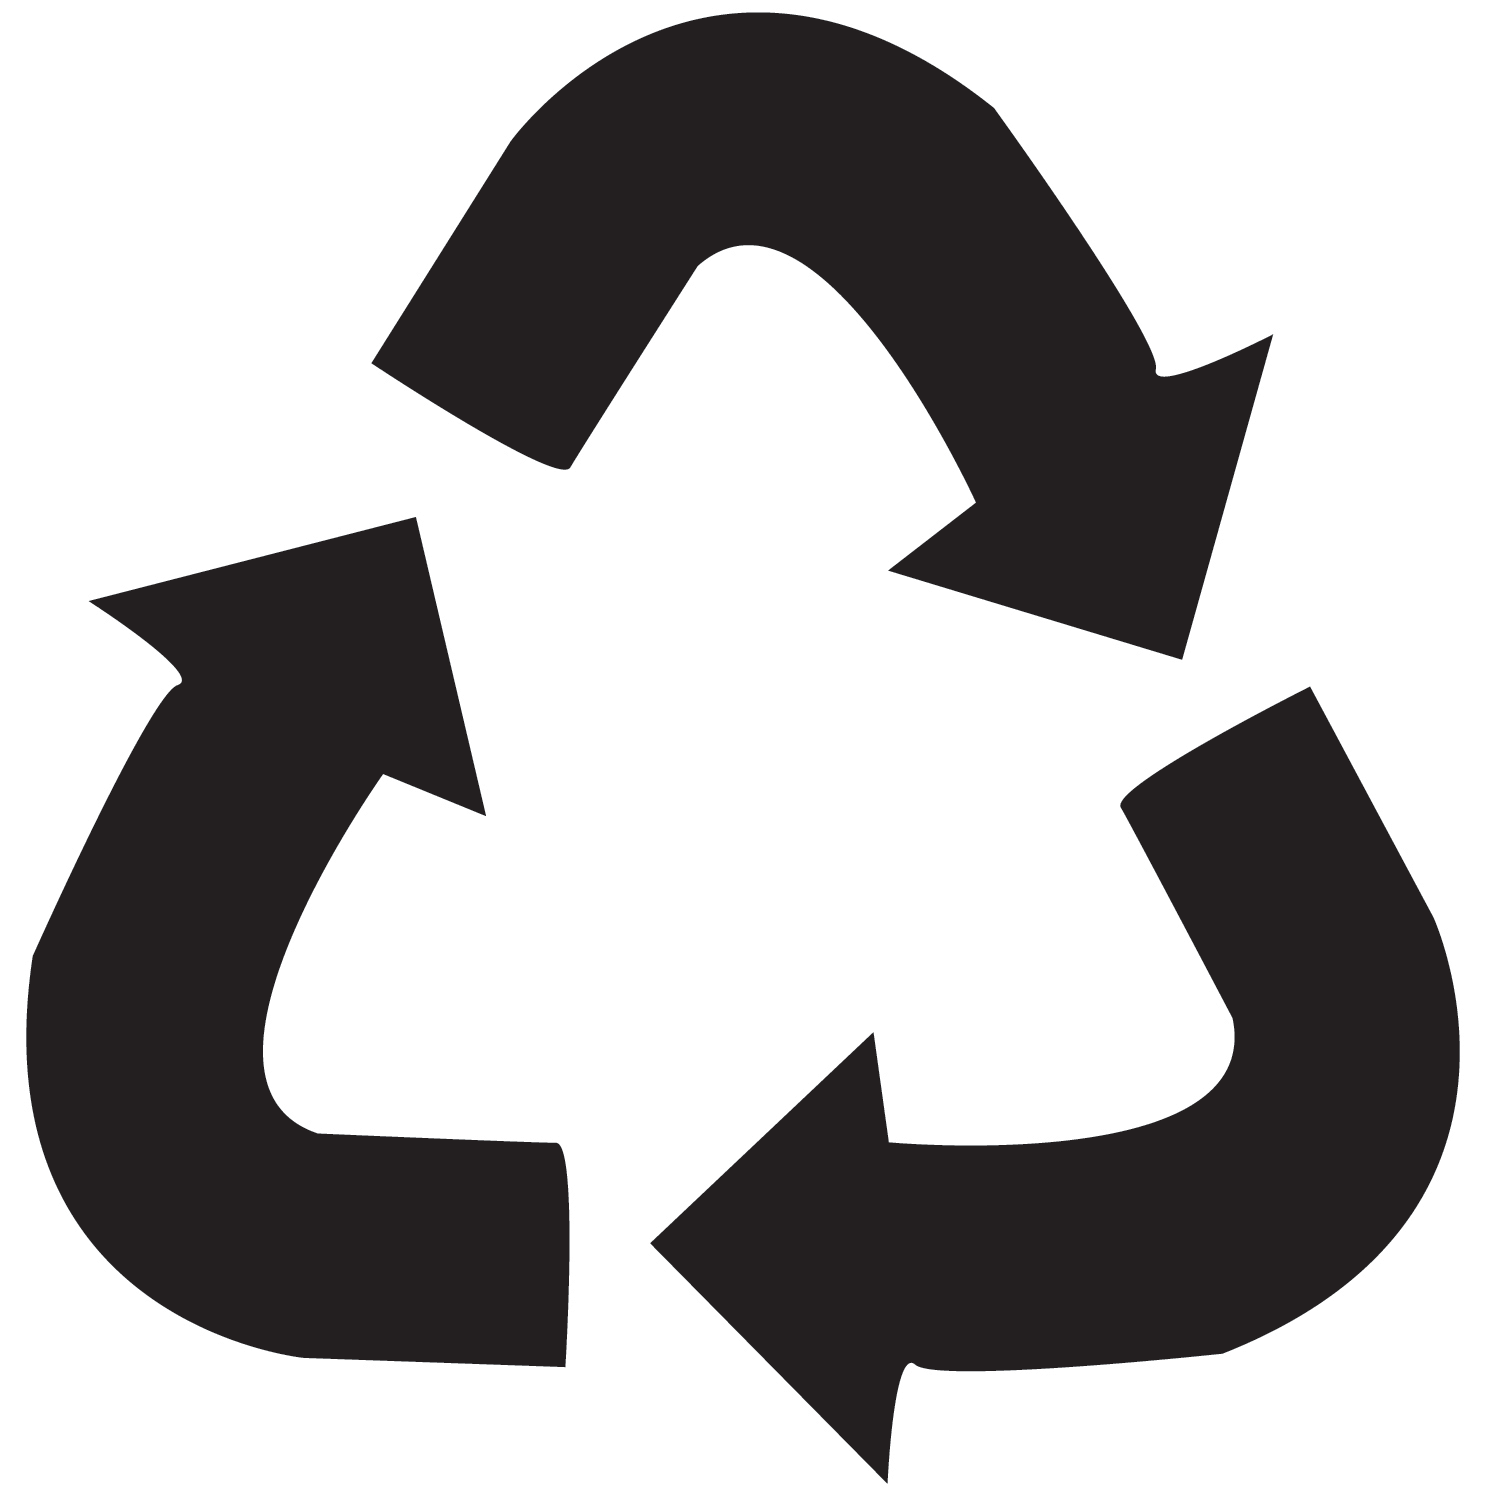 Recycling Symbol Vector - ClipArt Best